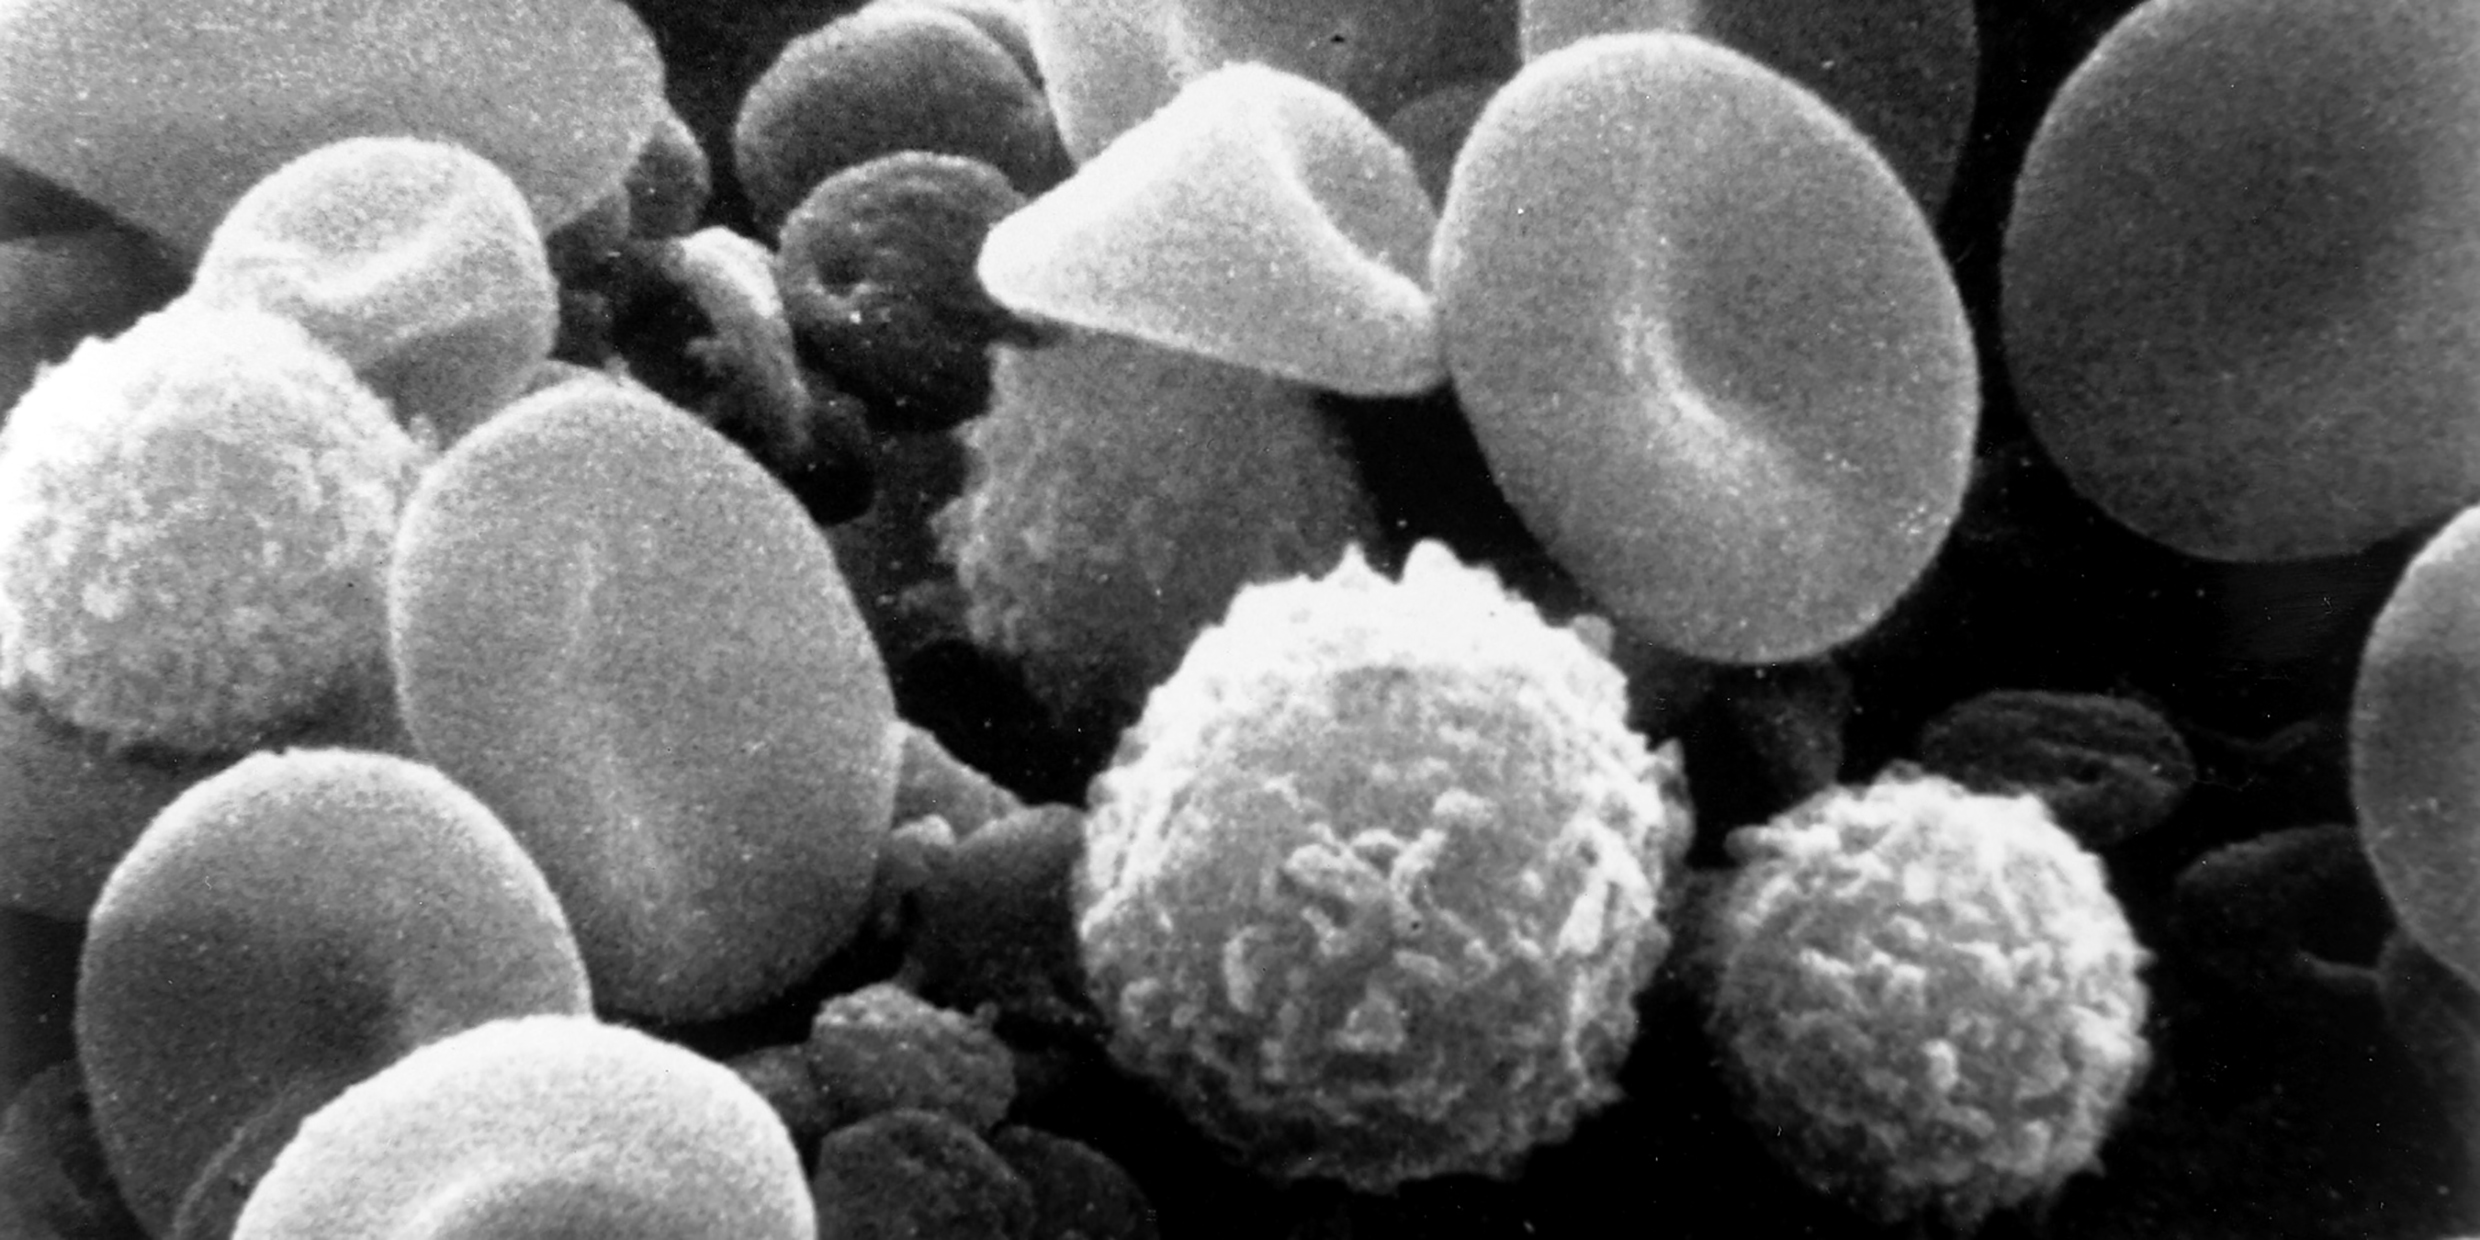 Image of blood cells and lymphocytes